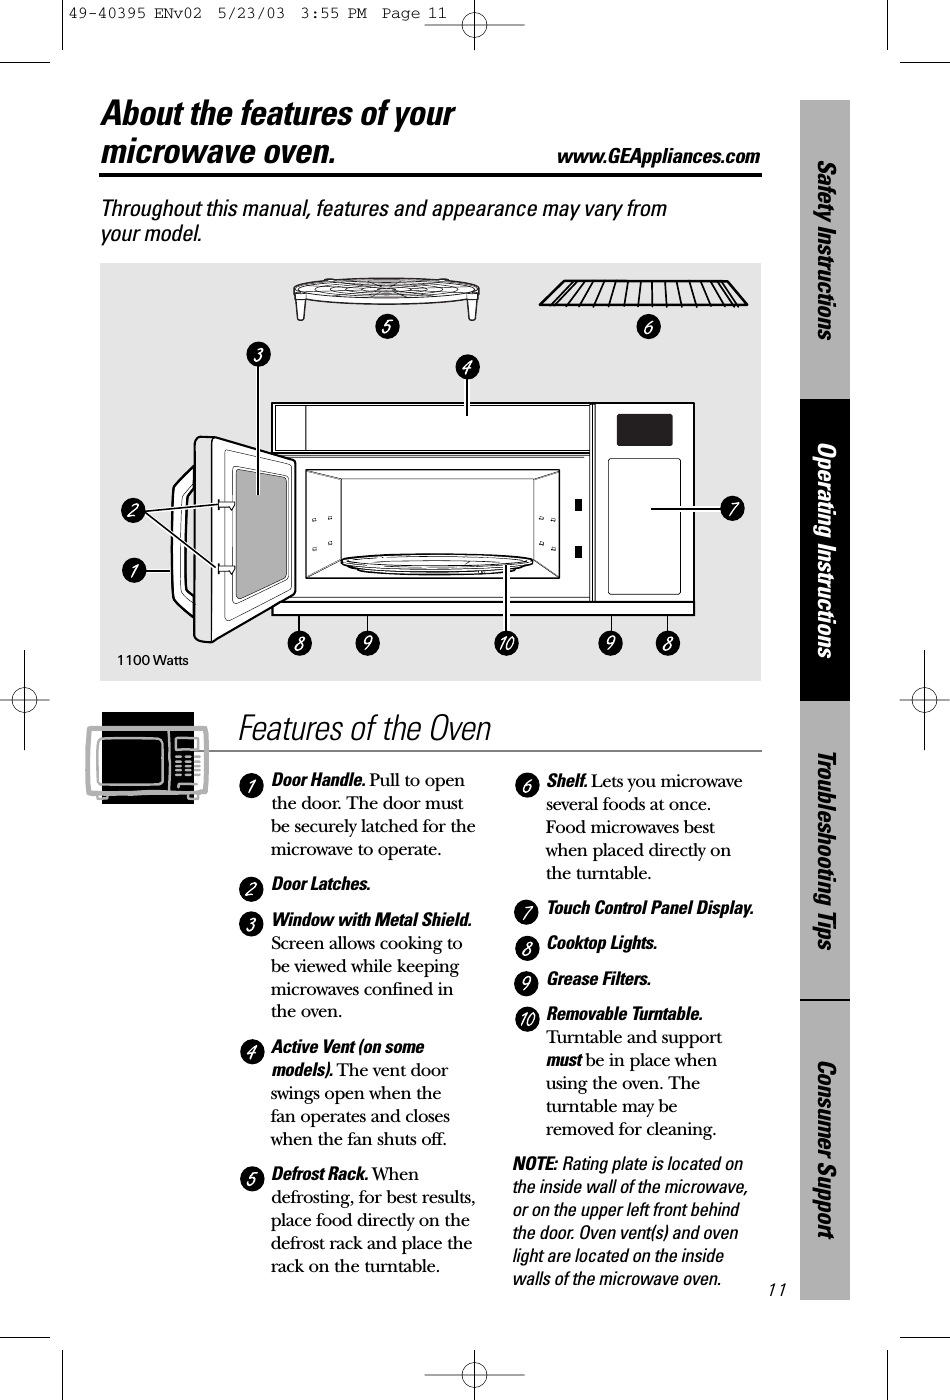 Consumer SupportTroubleshooting TipsOperating InstructionsSafety Instructions11About the features of your microwave oven. www.GEAppliances.comThroughout this manual, features and appearance may vary from your model.Features of the OvenDoor Handle. Pull to openthe door. The door mustbe securely latched for themicrowave to operate.Door Latches. Window with Metal Shield.Screen allows cooking to be viewed while keepingmicrowaves confined in the oven.Active Vent (on somemodels). The vent doorswings open when the fan operates and closeswhen the fan shuts off.Defrost Rack. Whendefrosting, for best results,place food directly on thedefrost rack and place therack on the turntable.Shelf. Lets you microwaveseveral foods at once. Food microwaves best when placed directly on the turntable.Touch Control Panel Display. Cooktop Lights.Grease Filters.Removable Turntable.Turntable and supportmust be in place whenusing the oven. Theturntable may be removed for cleaning.NOTE: Rating plate is located onthe inside wall of the microwave,or on the upper left front behindthe door. Oven vent(s) and ovenlight are located on the insidewalls of the microwave oven.1100 Watts49-40395 ENv02  5/23/03  3:55 PM  Page 11